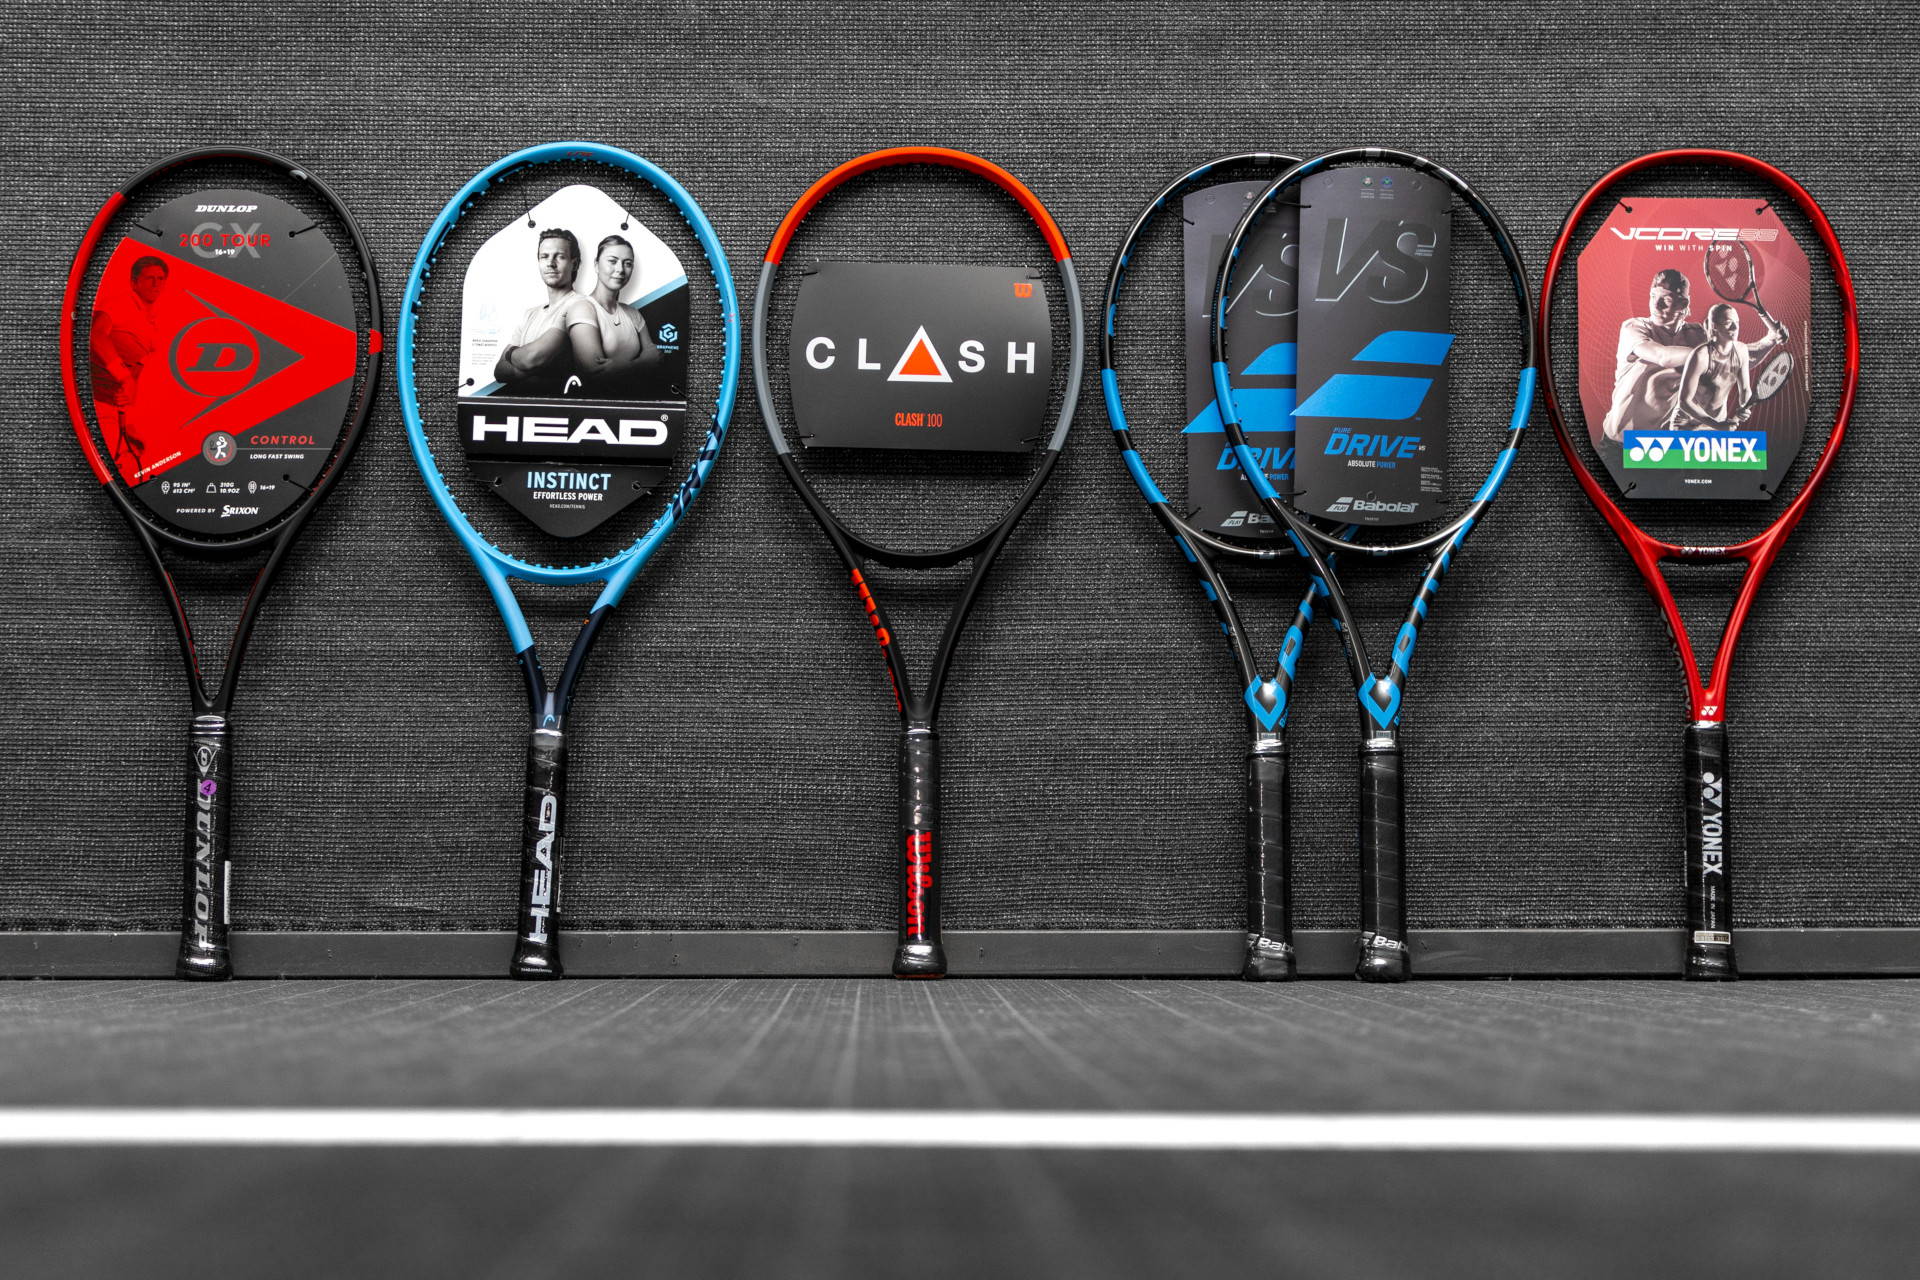 Introducing the Tennis.com Editor's Choice Racquets for 2019